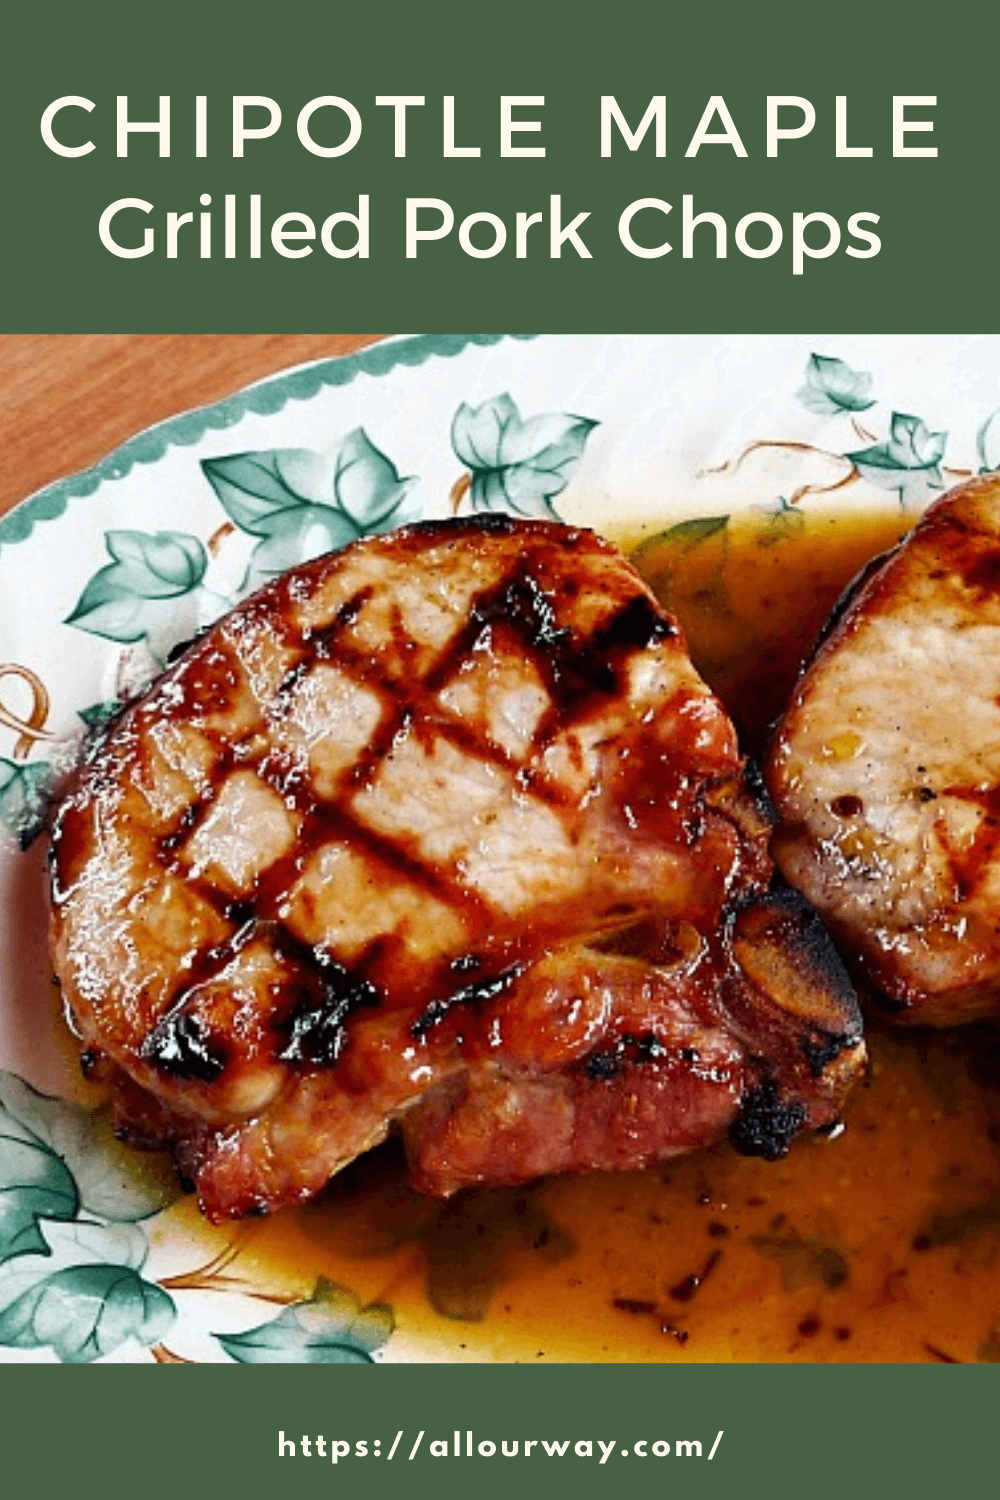 A buttery maple sweet glaze that is spiced with smokey chipotle chilies and garlic. This glaze gives a special touch to vegetables and meats. Can also be used as a dipping sauce. Try the glaze on your grilled corn - you'll never want to eat it any other way.